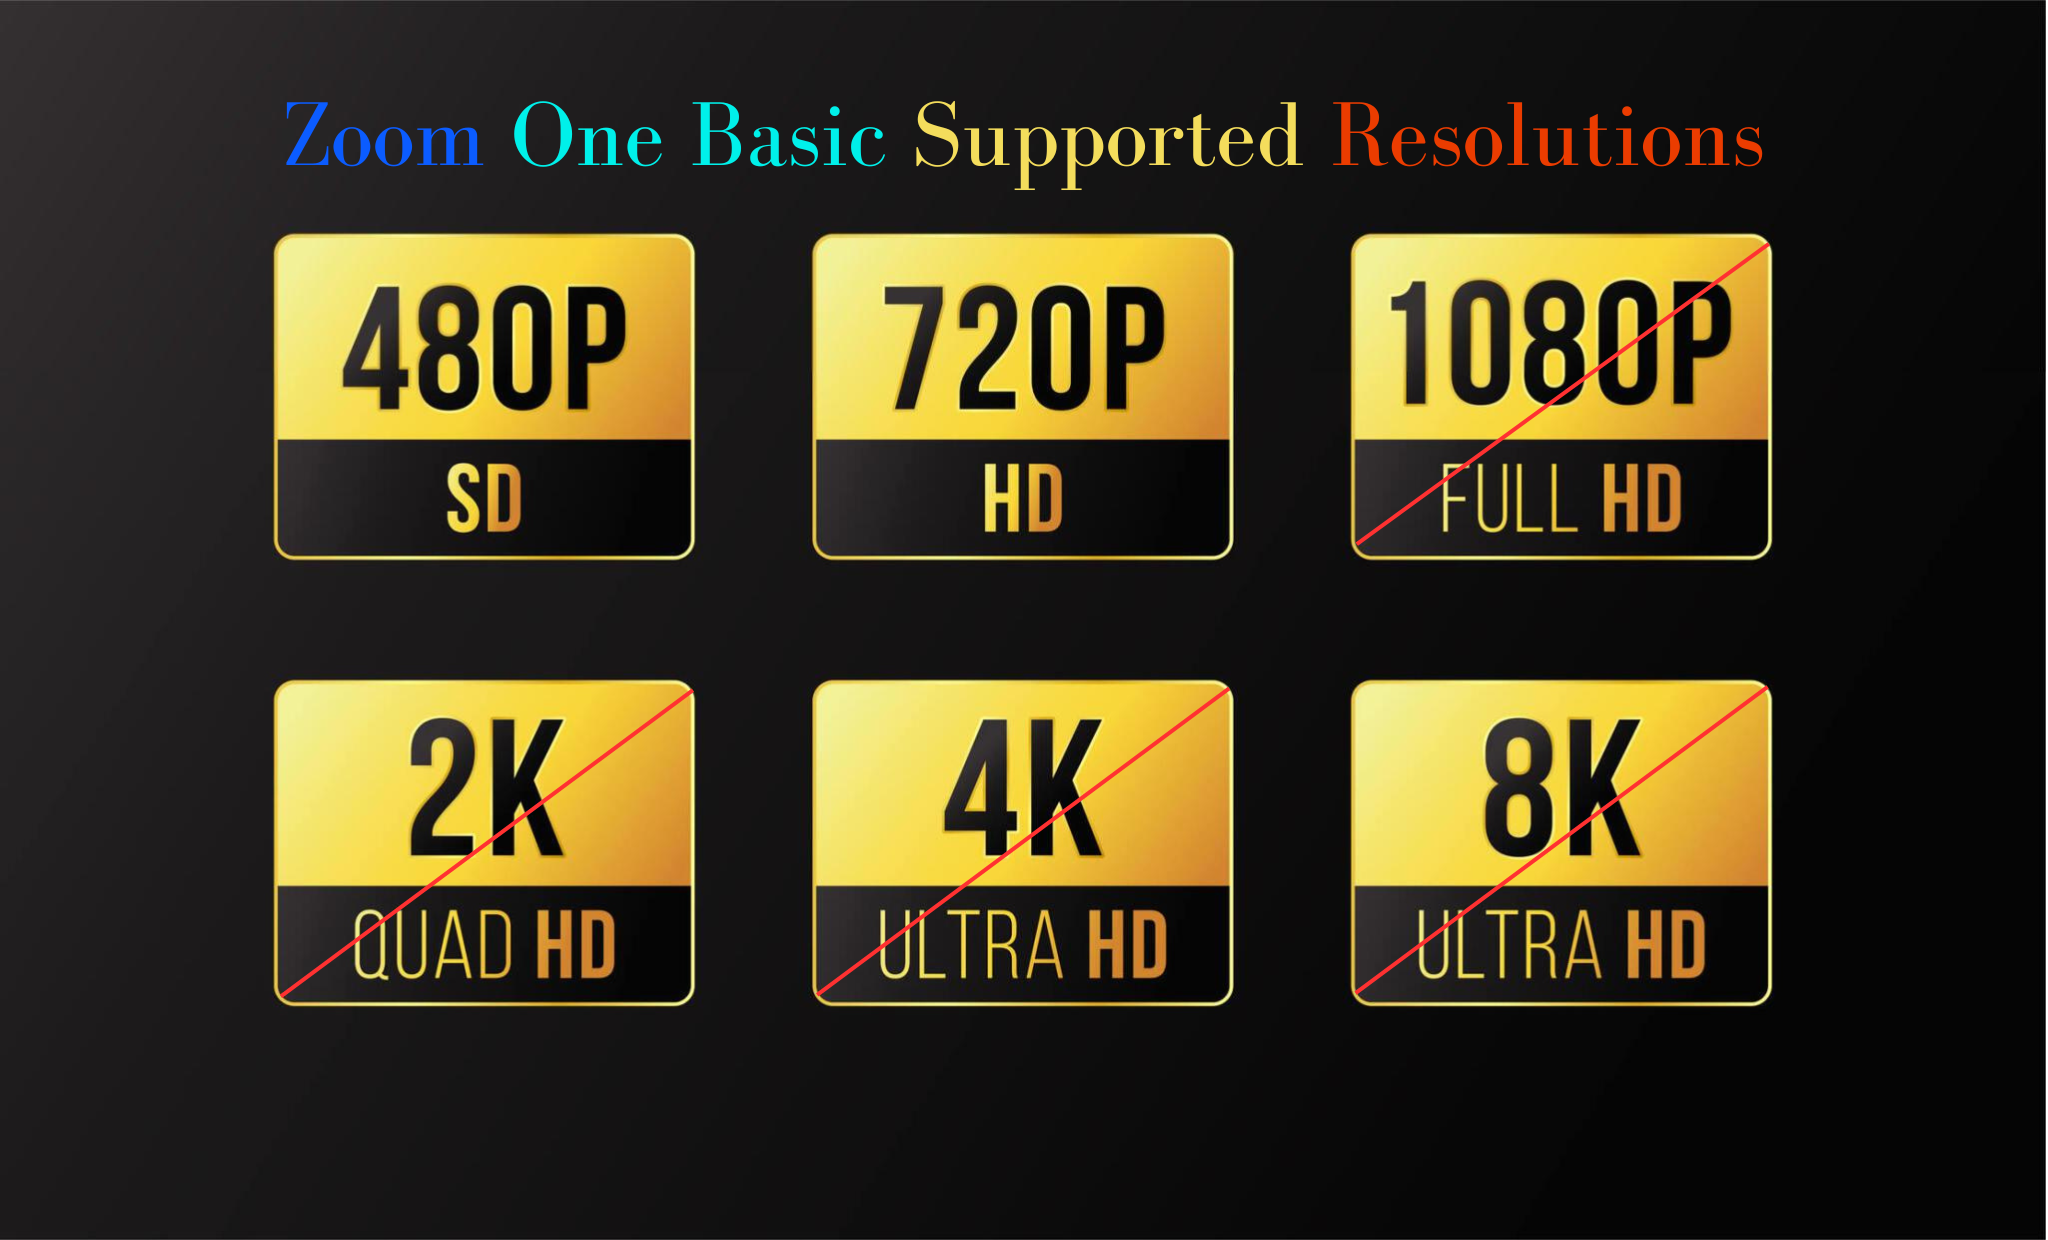 Zoom One Basic Supported Resolutions infographic